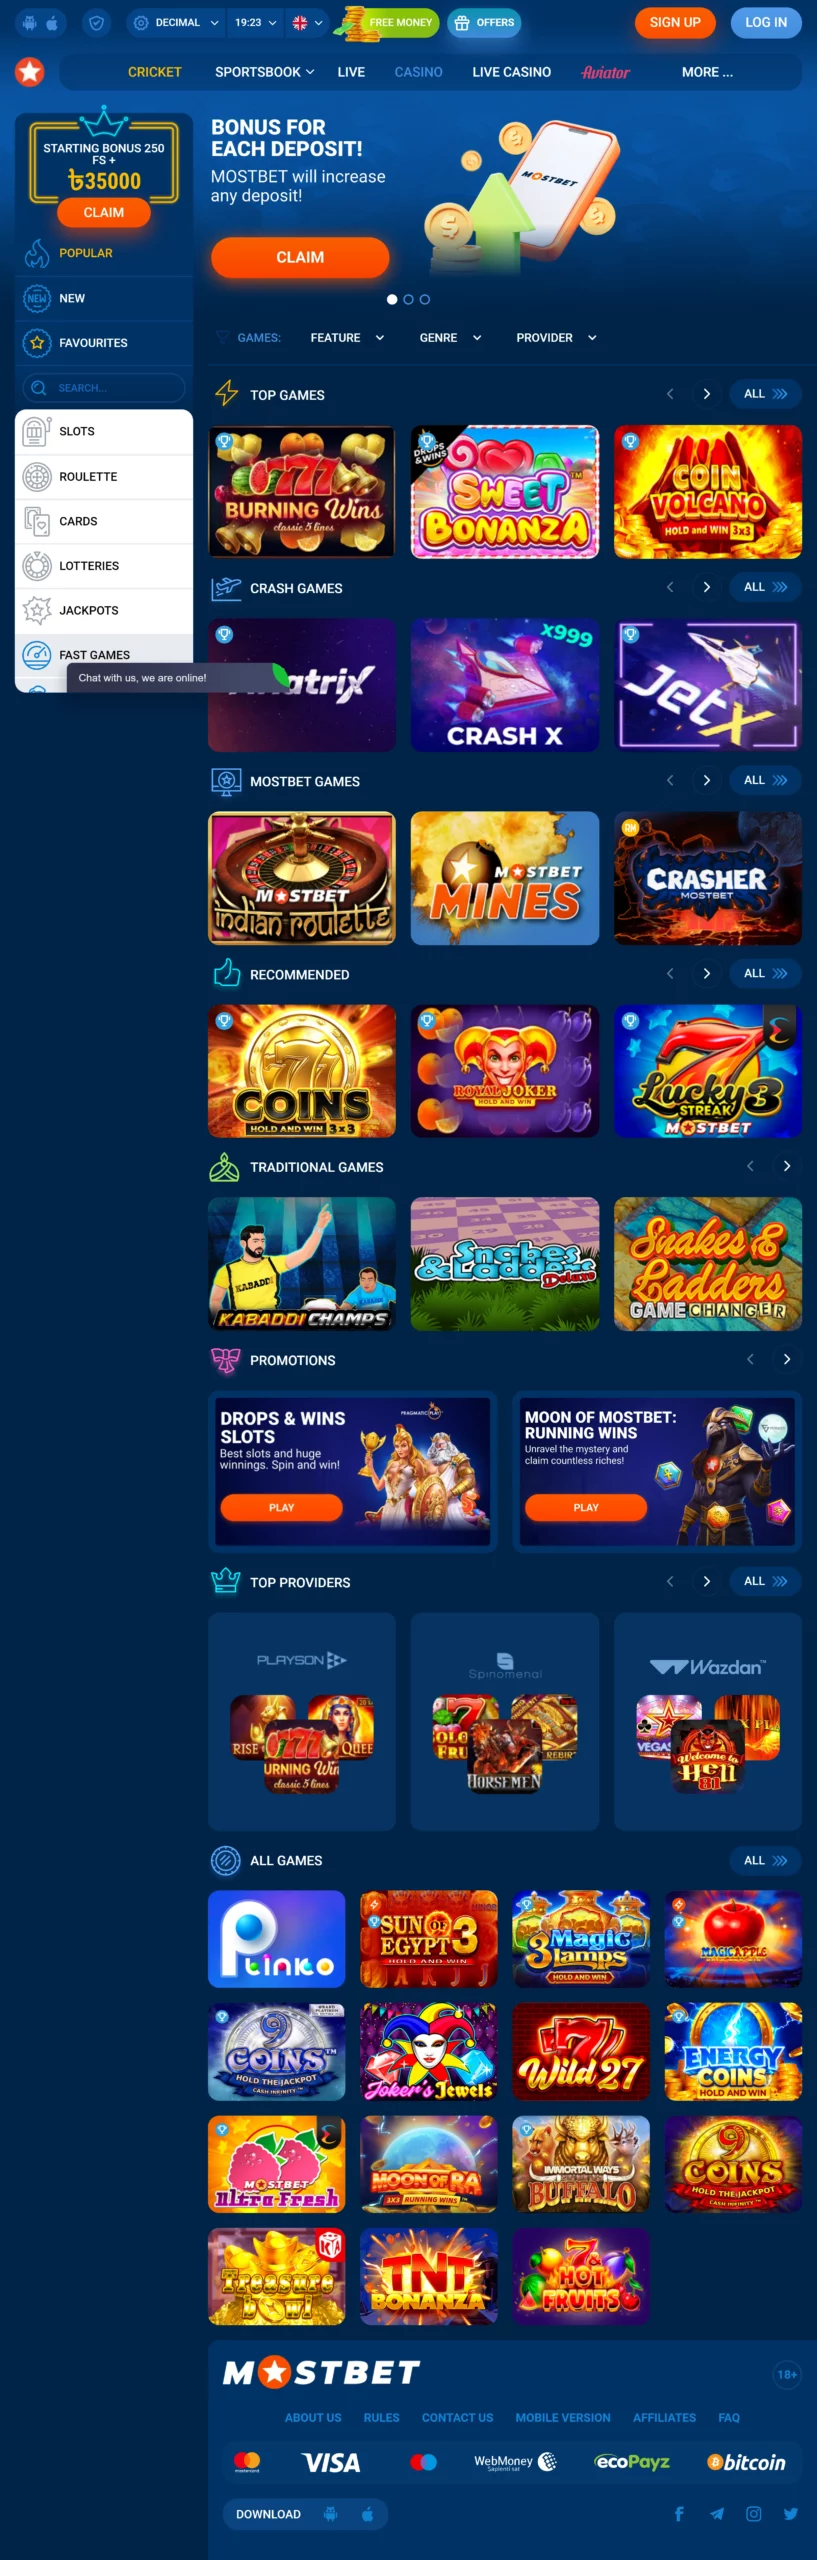 The Best 5 Examples Of Mostplay in Bangladesh: Online Betting Platform and Casino